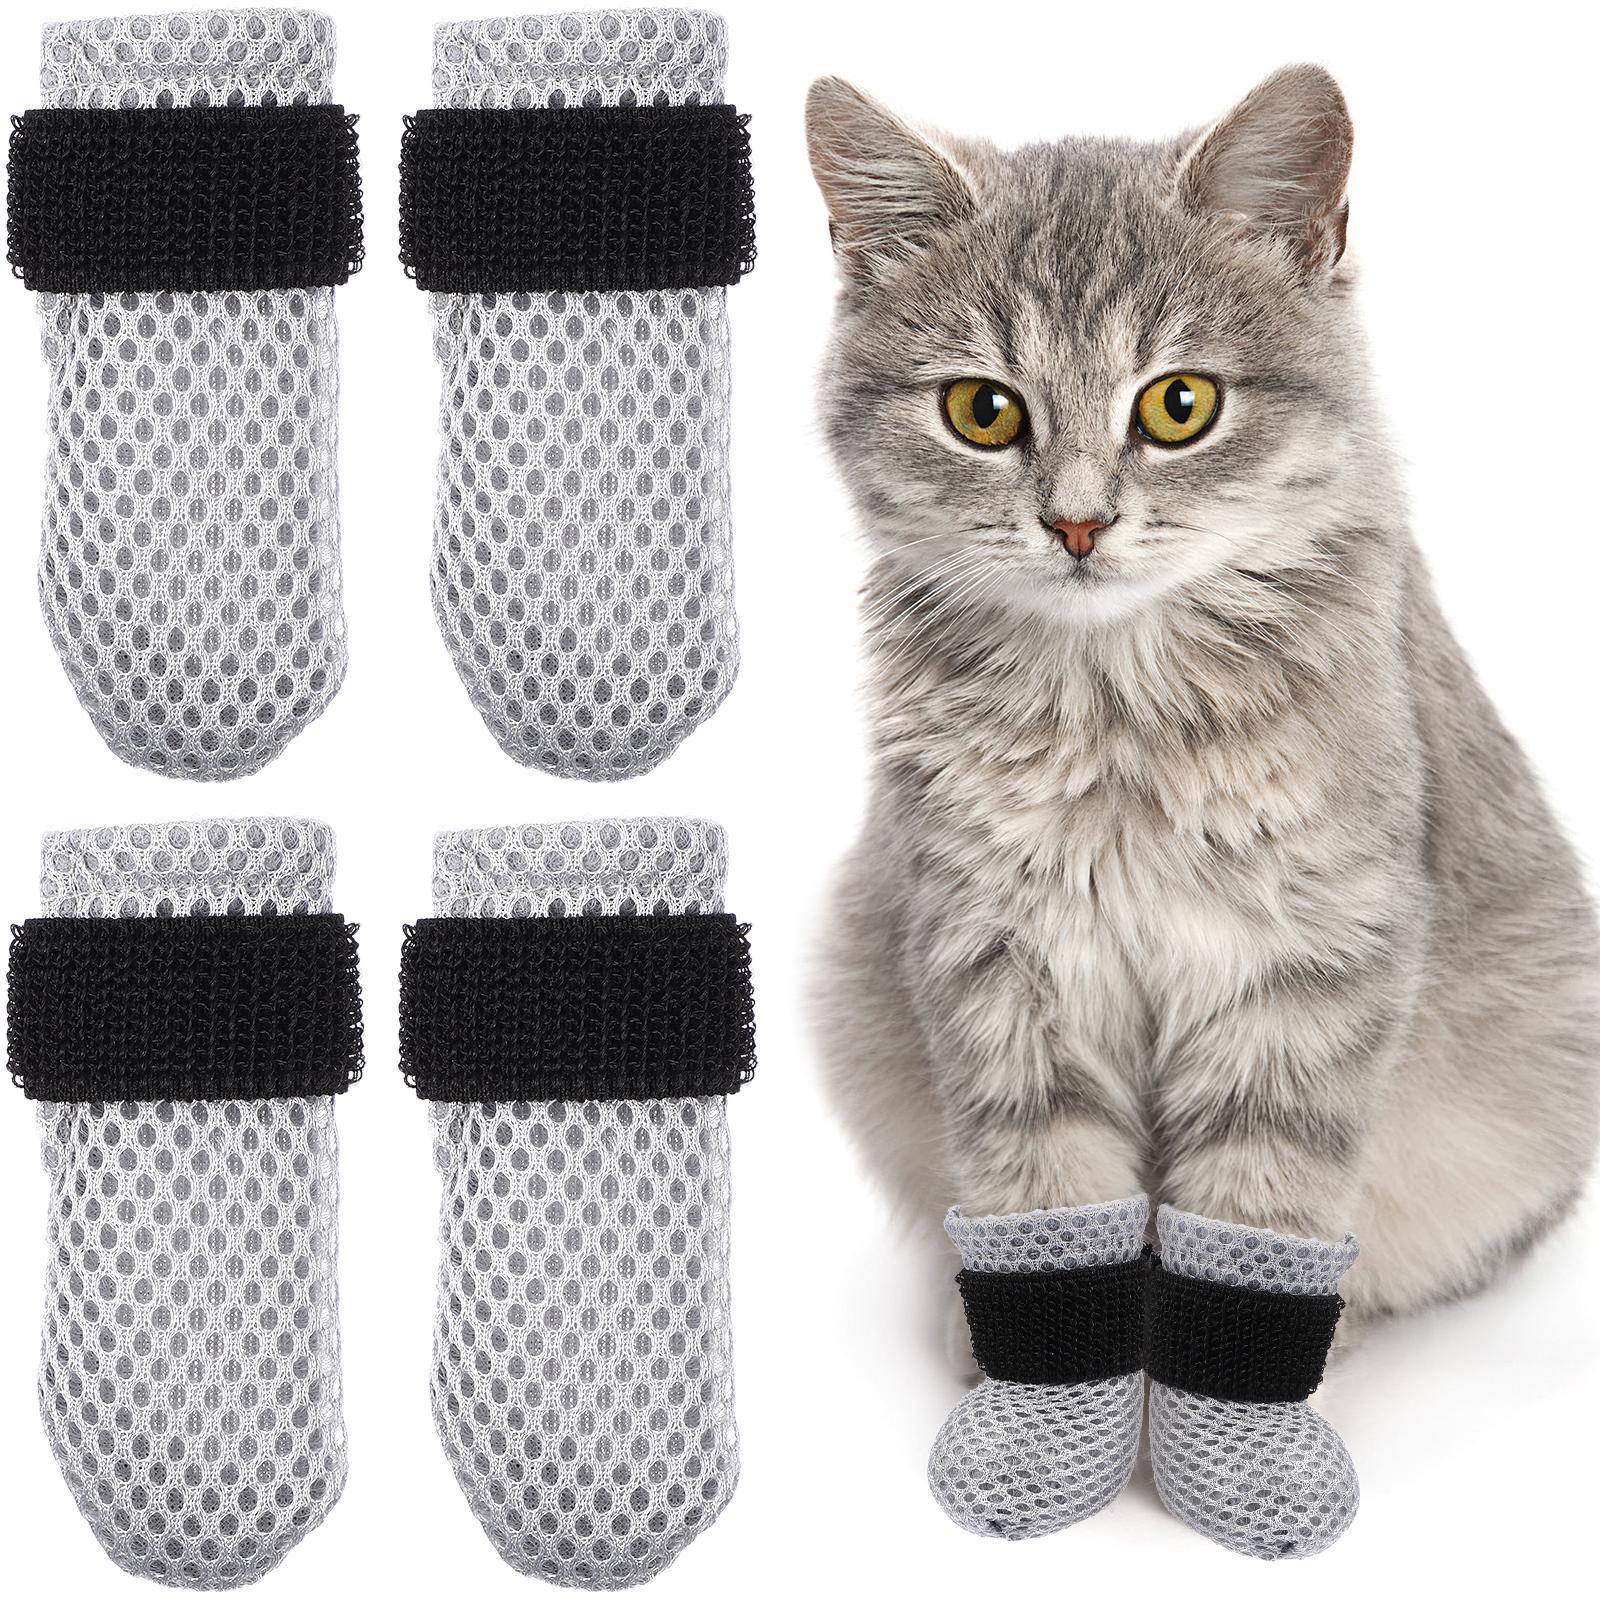 4 Pcs Cat Feet Covers Kitten Paw Covers Boots Shoe Socks Anti Scratch Foot Sleeves for Cleaning Shaving Checking Treatment